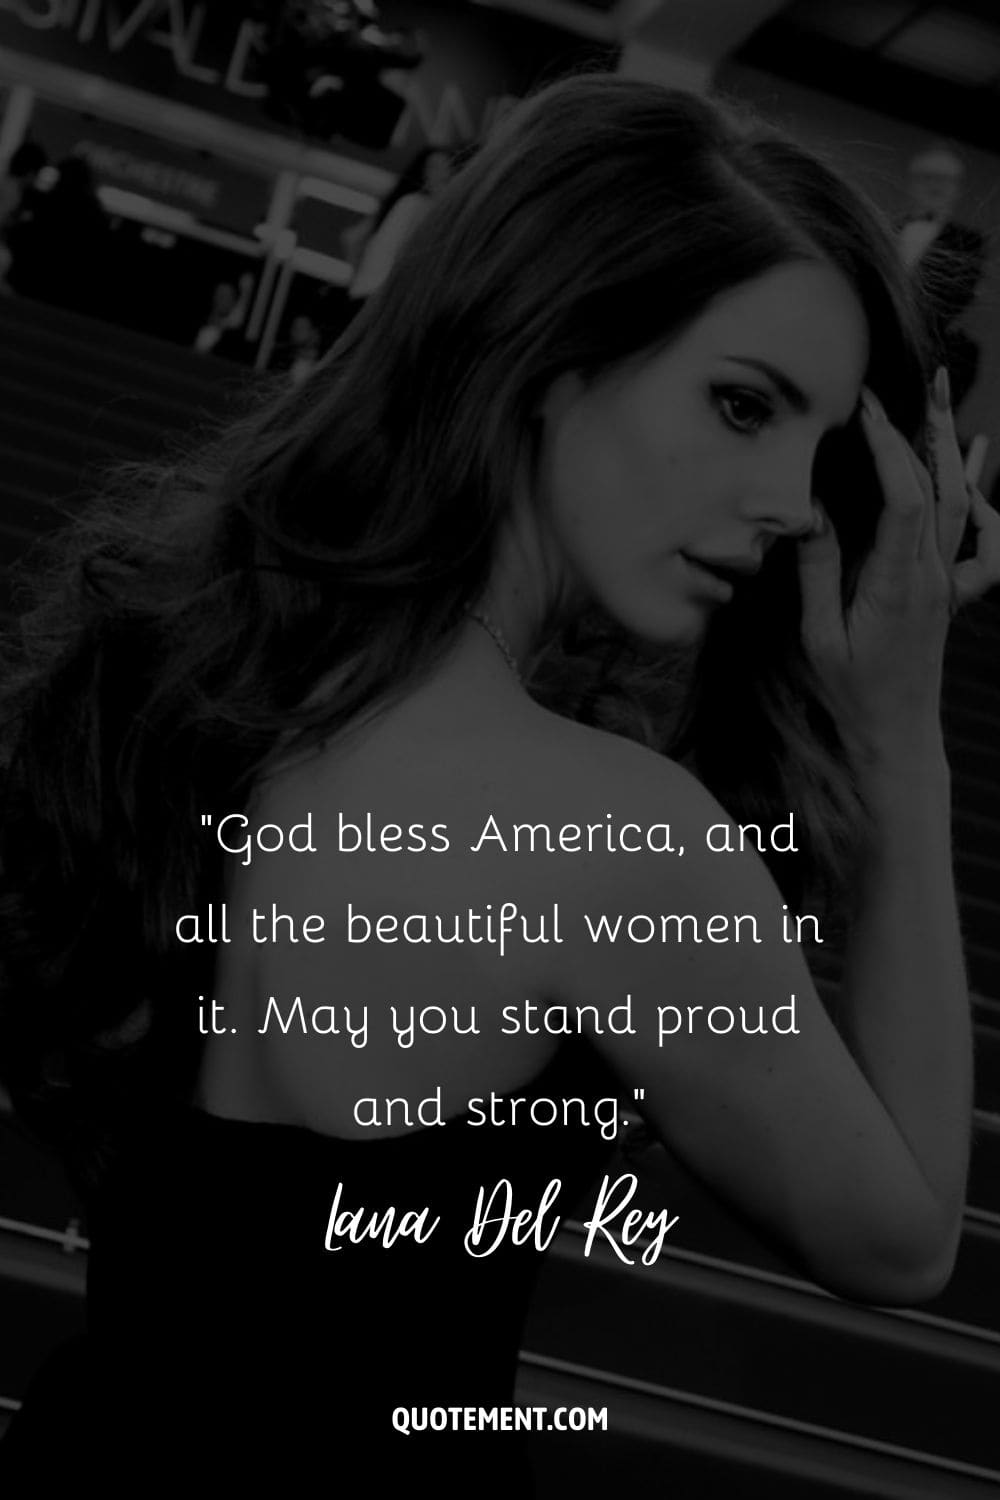 God bless America, and all the beautiful women in it. May you stand proud and strong